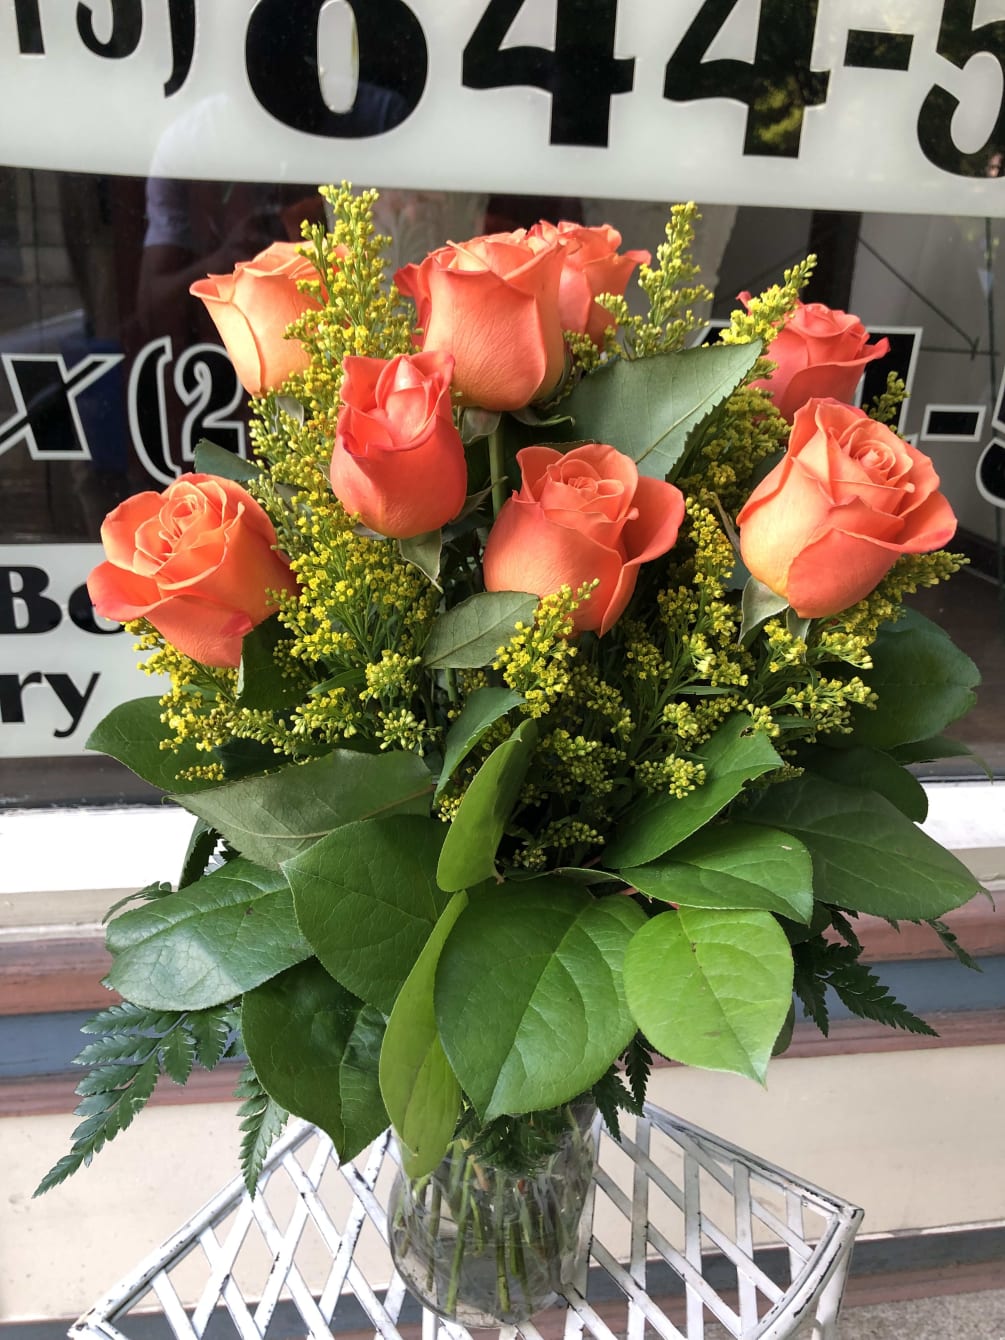 These orange roses are a excellent way to say &ldquo;Happy Birthday&rdquo; 